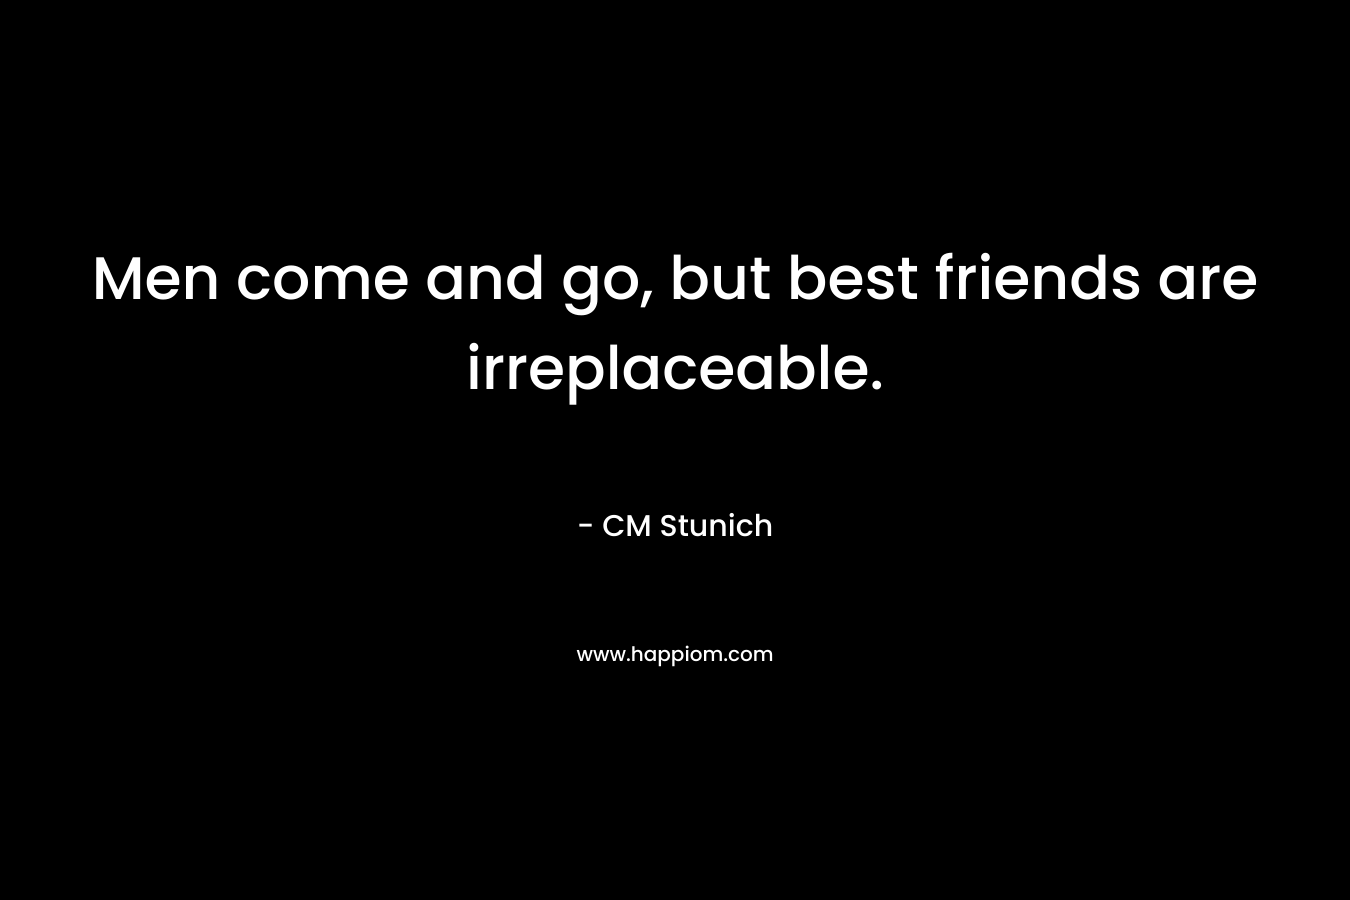 Men come and go, but best friends are irreplaceable.